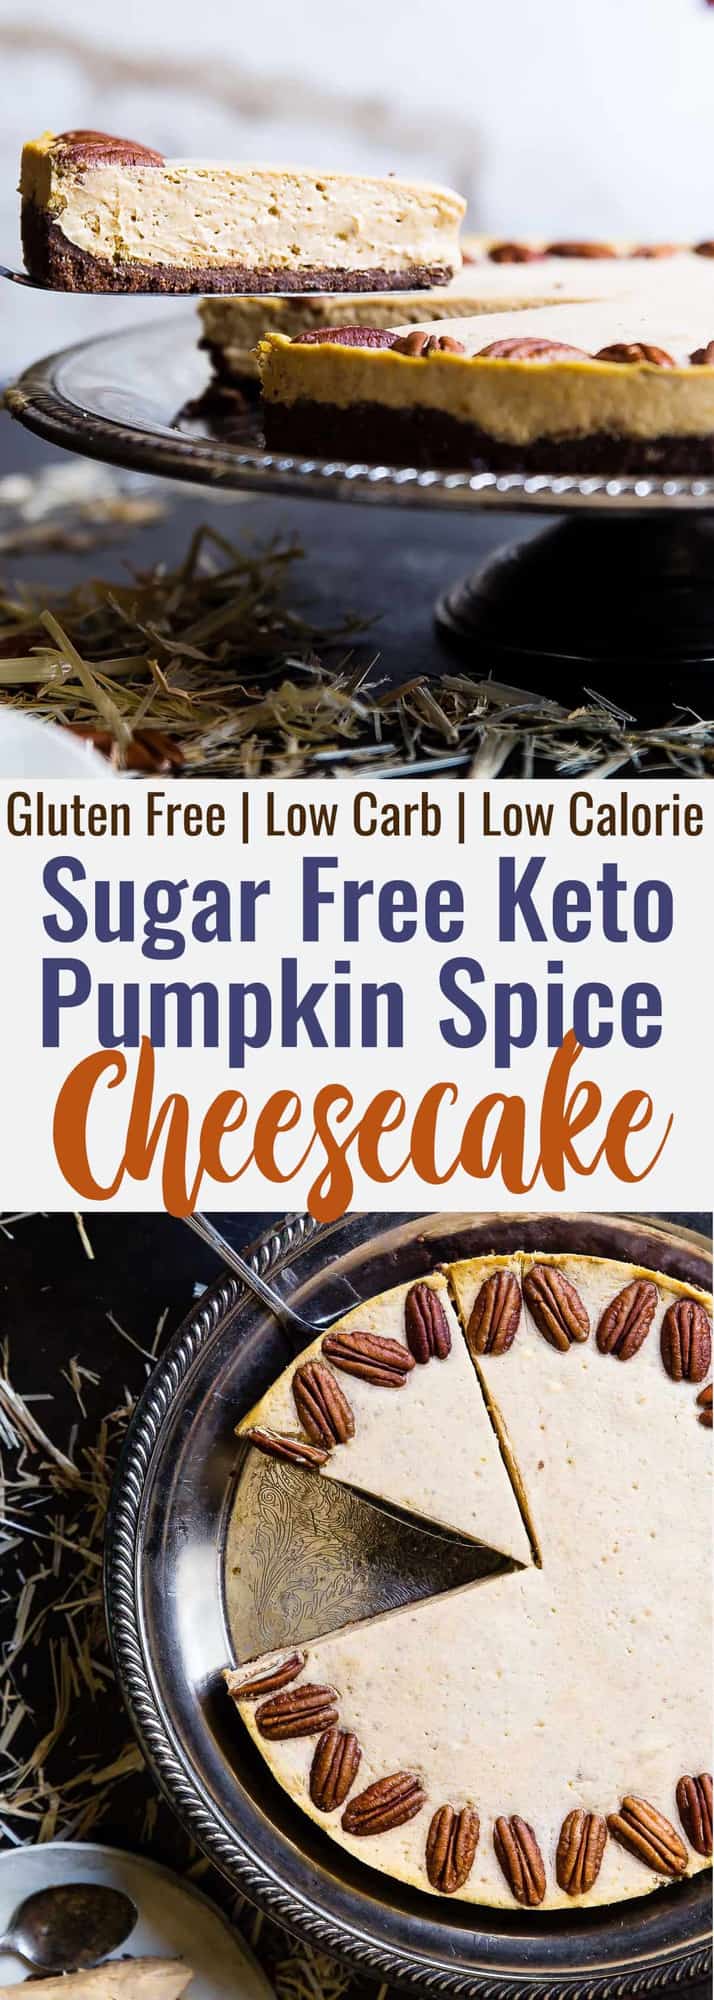 Low Carb Keto Pumpkin Cheesecake - This healthy low carb pumpkin cheesecake is SO creamy and spicy-sweet you will never believe it's gluten, grain and sugar free and only 240 calories! The BEST fall dessert ever! | #Foodfaithfitness | #Glutenfree #Keto #Lowcarb #Pumpkin #Sugarfree